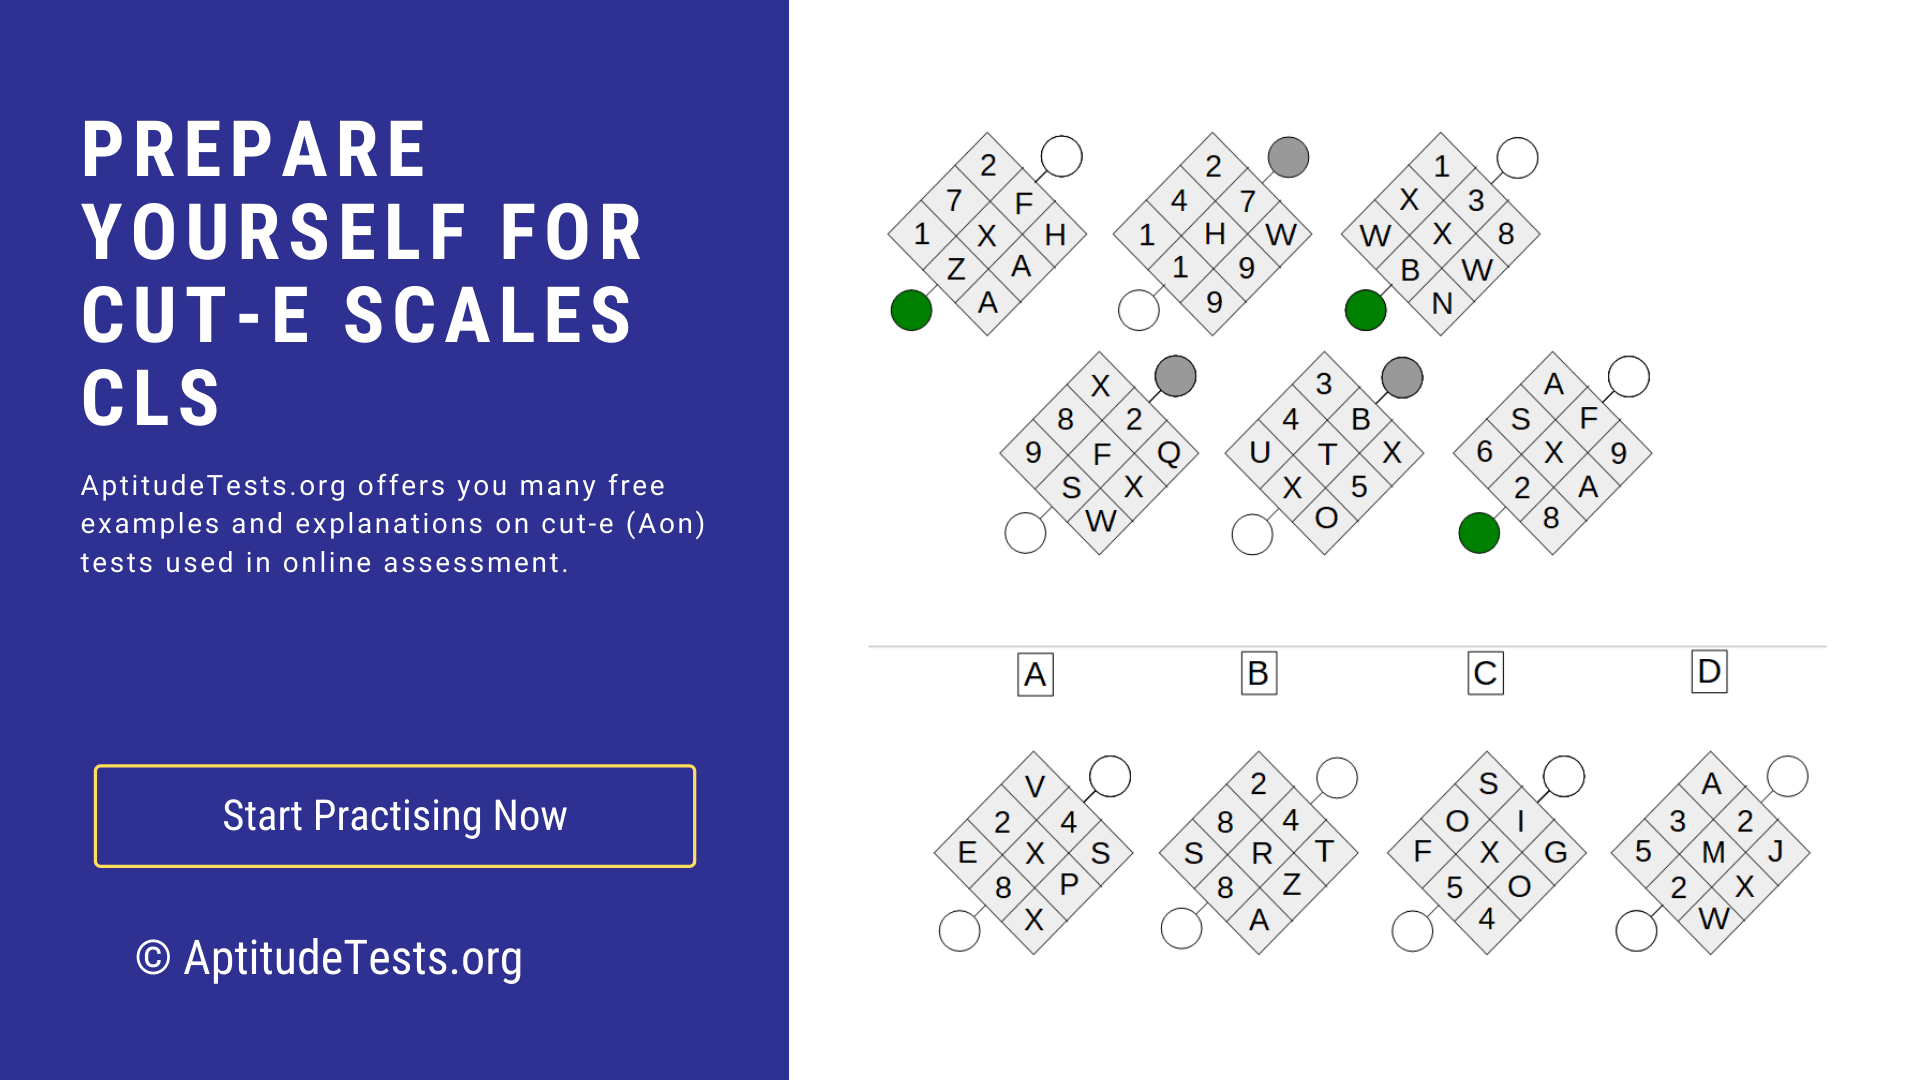 cut-e-scales-cls-pdf-inductive-logical-thinking-explained